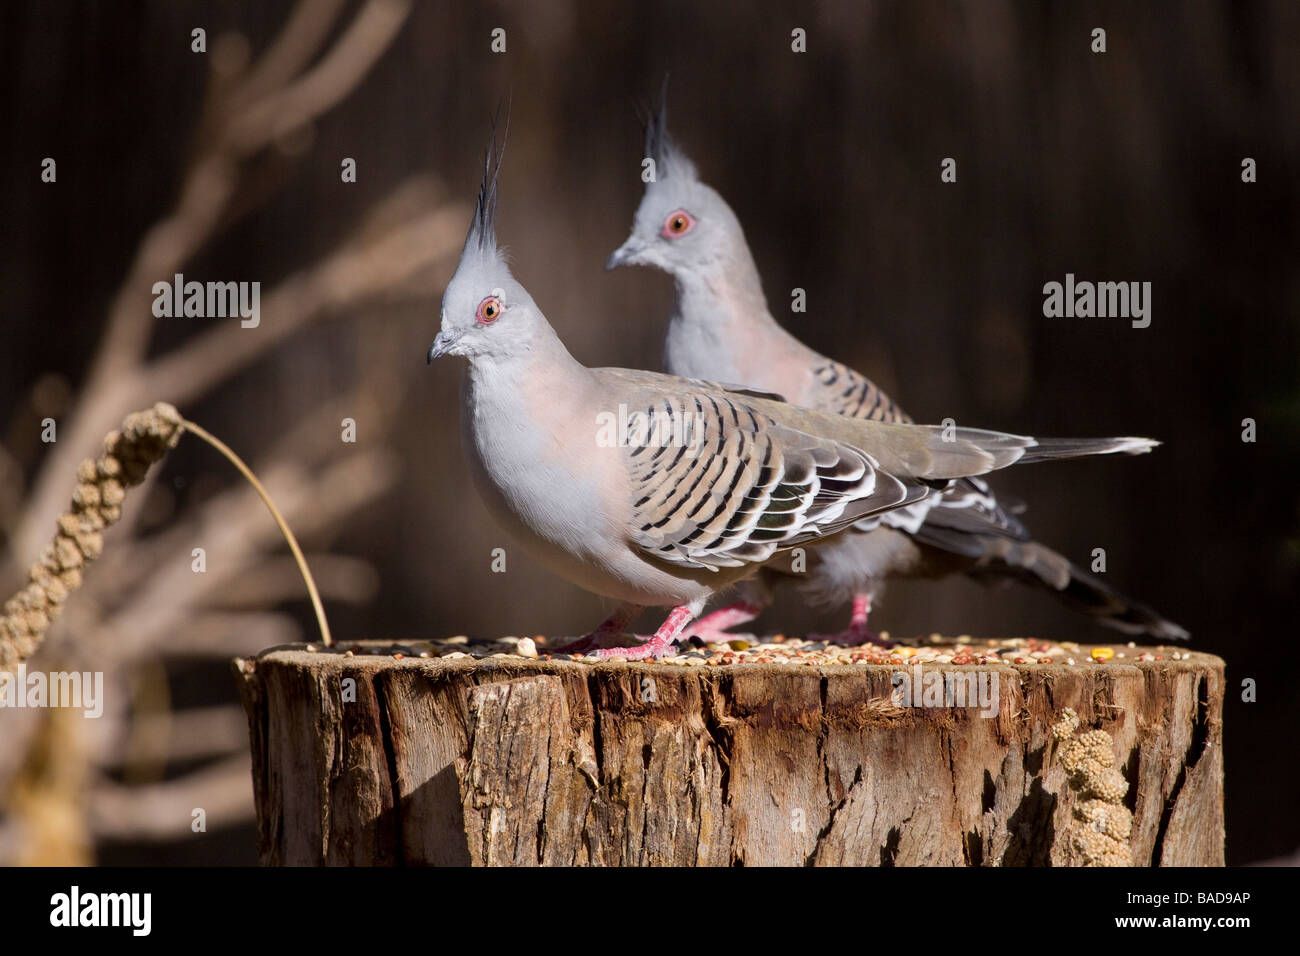 Two crested pigeons on a log Stock Photo